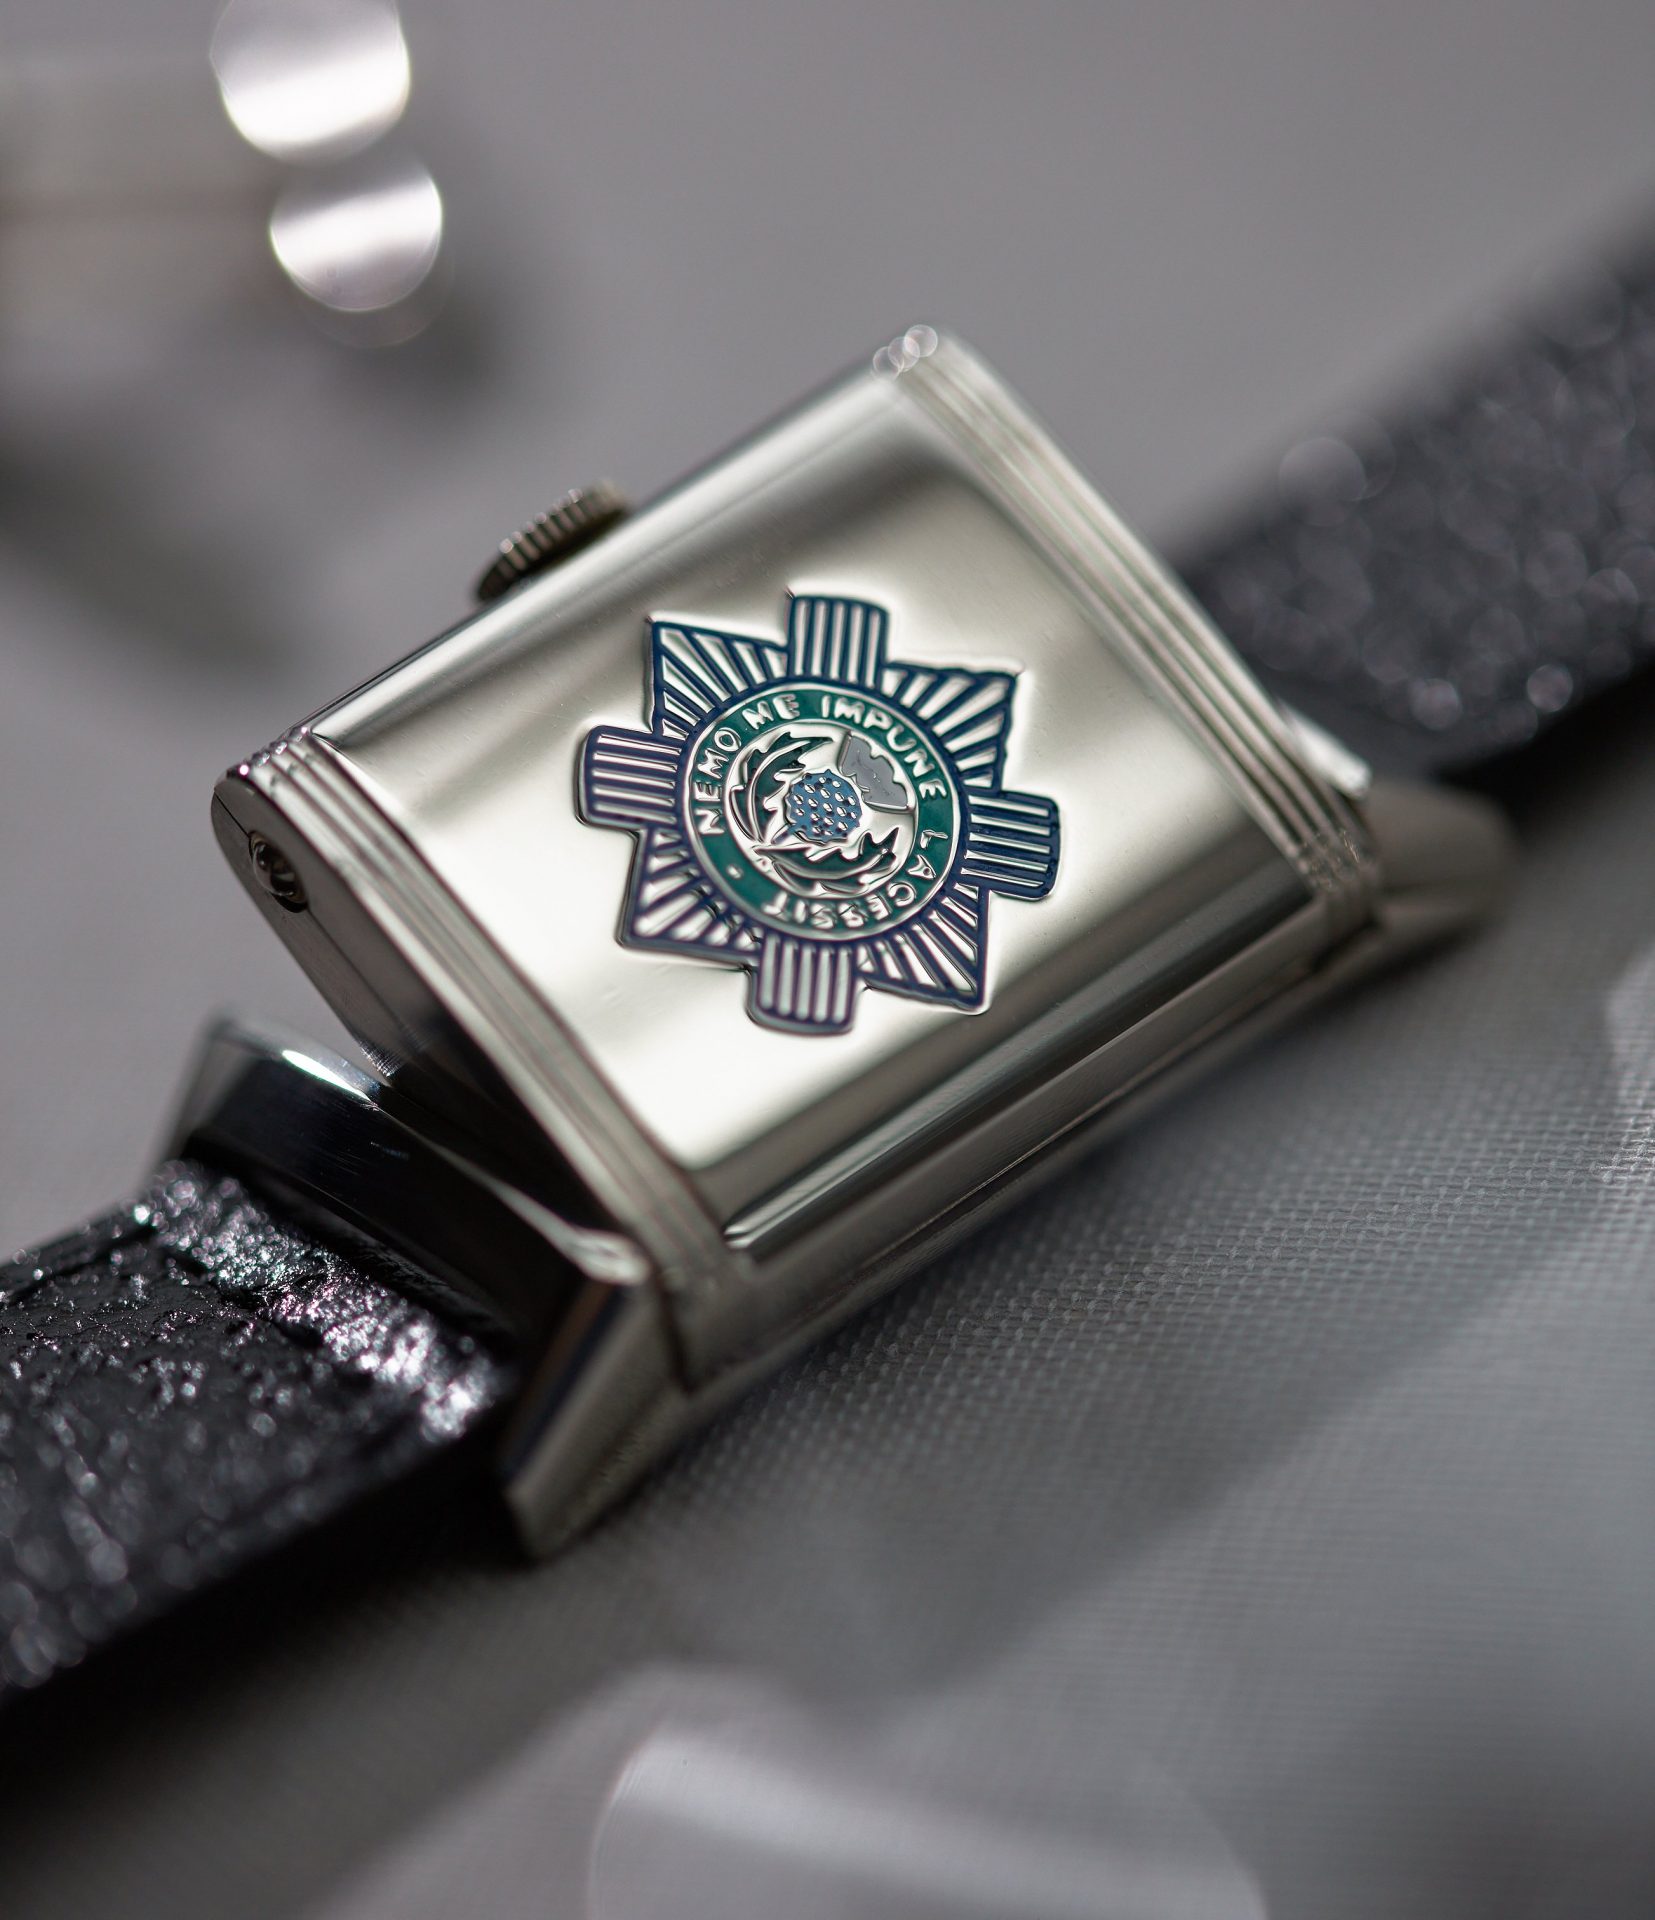 White dial Jaeger-LeCoultre Reverso from 1933 with Order of the Thistle emblem on caseback in The Flippin’ History of the Reverso for A Collected Man